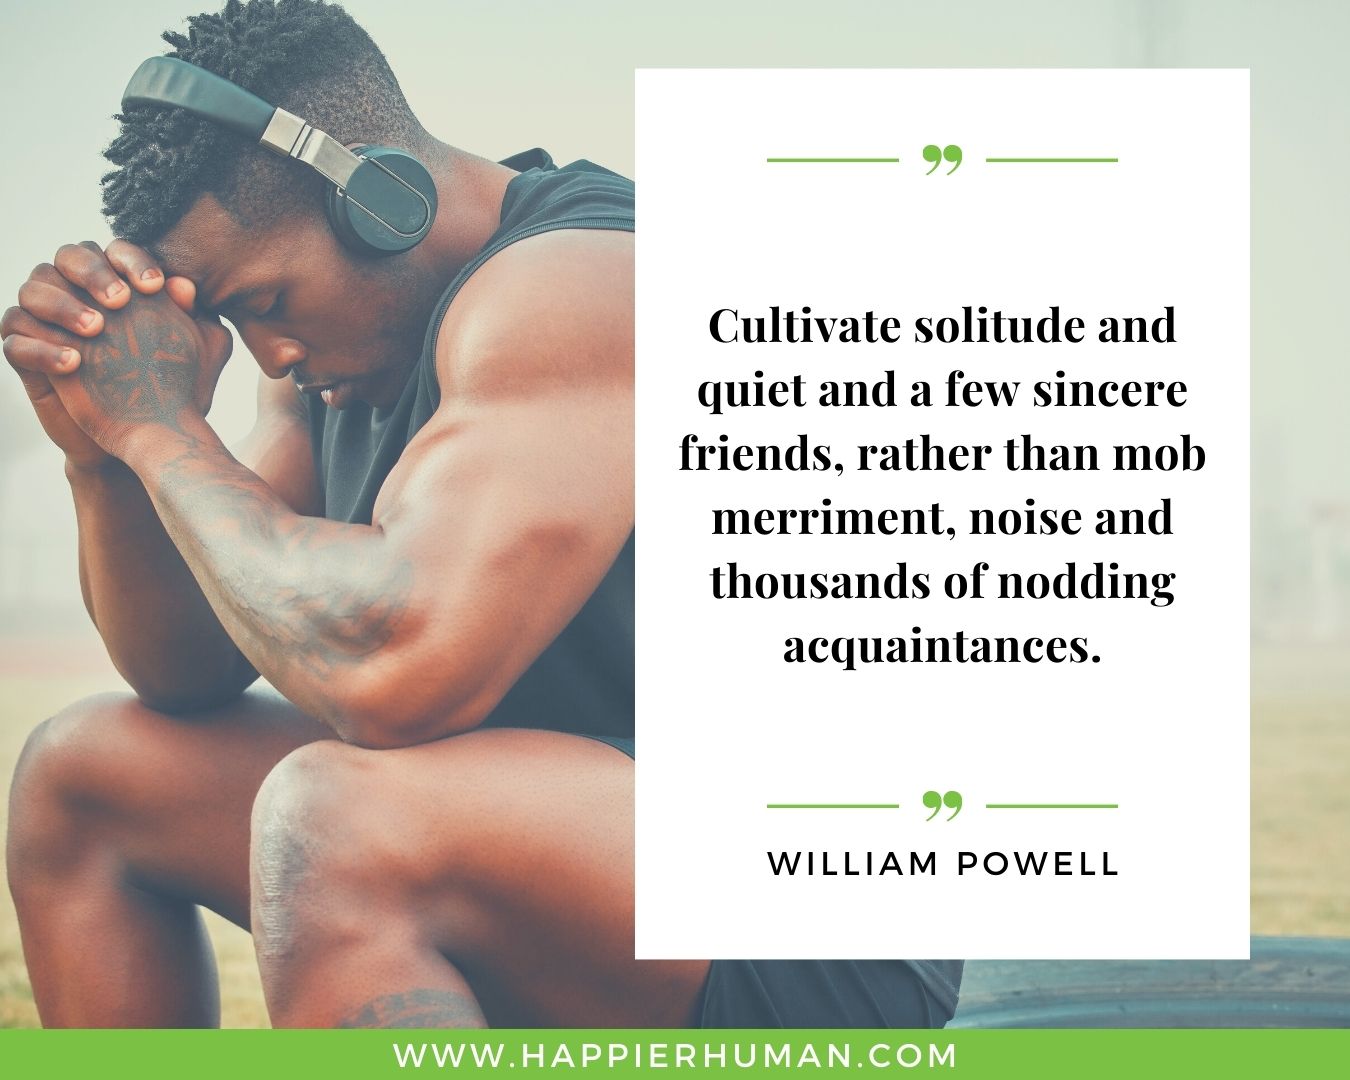 Loneliness Quotes - “Cultivate solitude and quiet and a few sincere friends, rather than mob merriment, noise and thousands of nodding acquaintances.”– William Powell